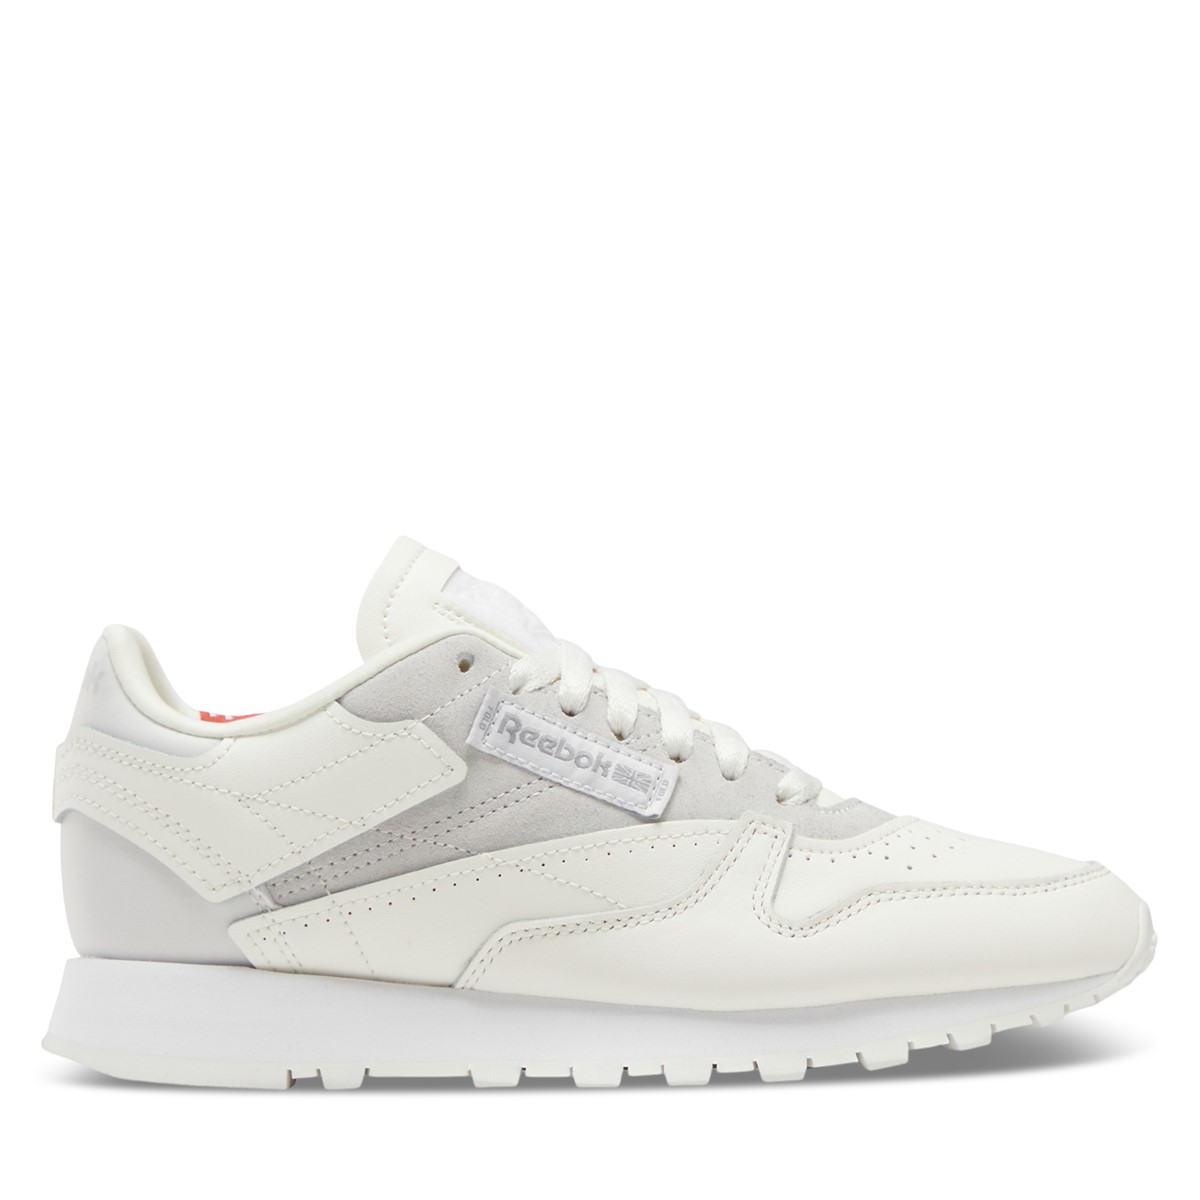 Women's Classic Leather Sneakers in Off-White